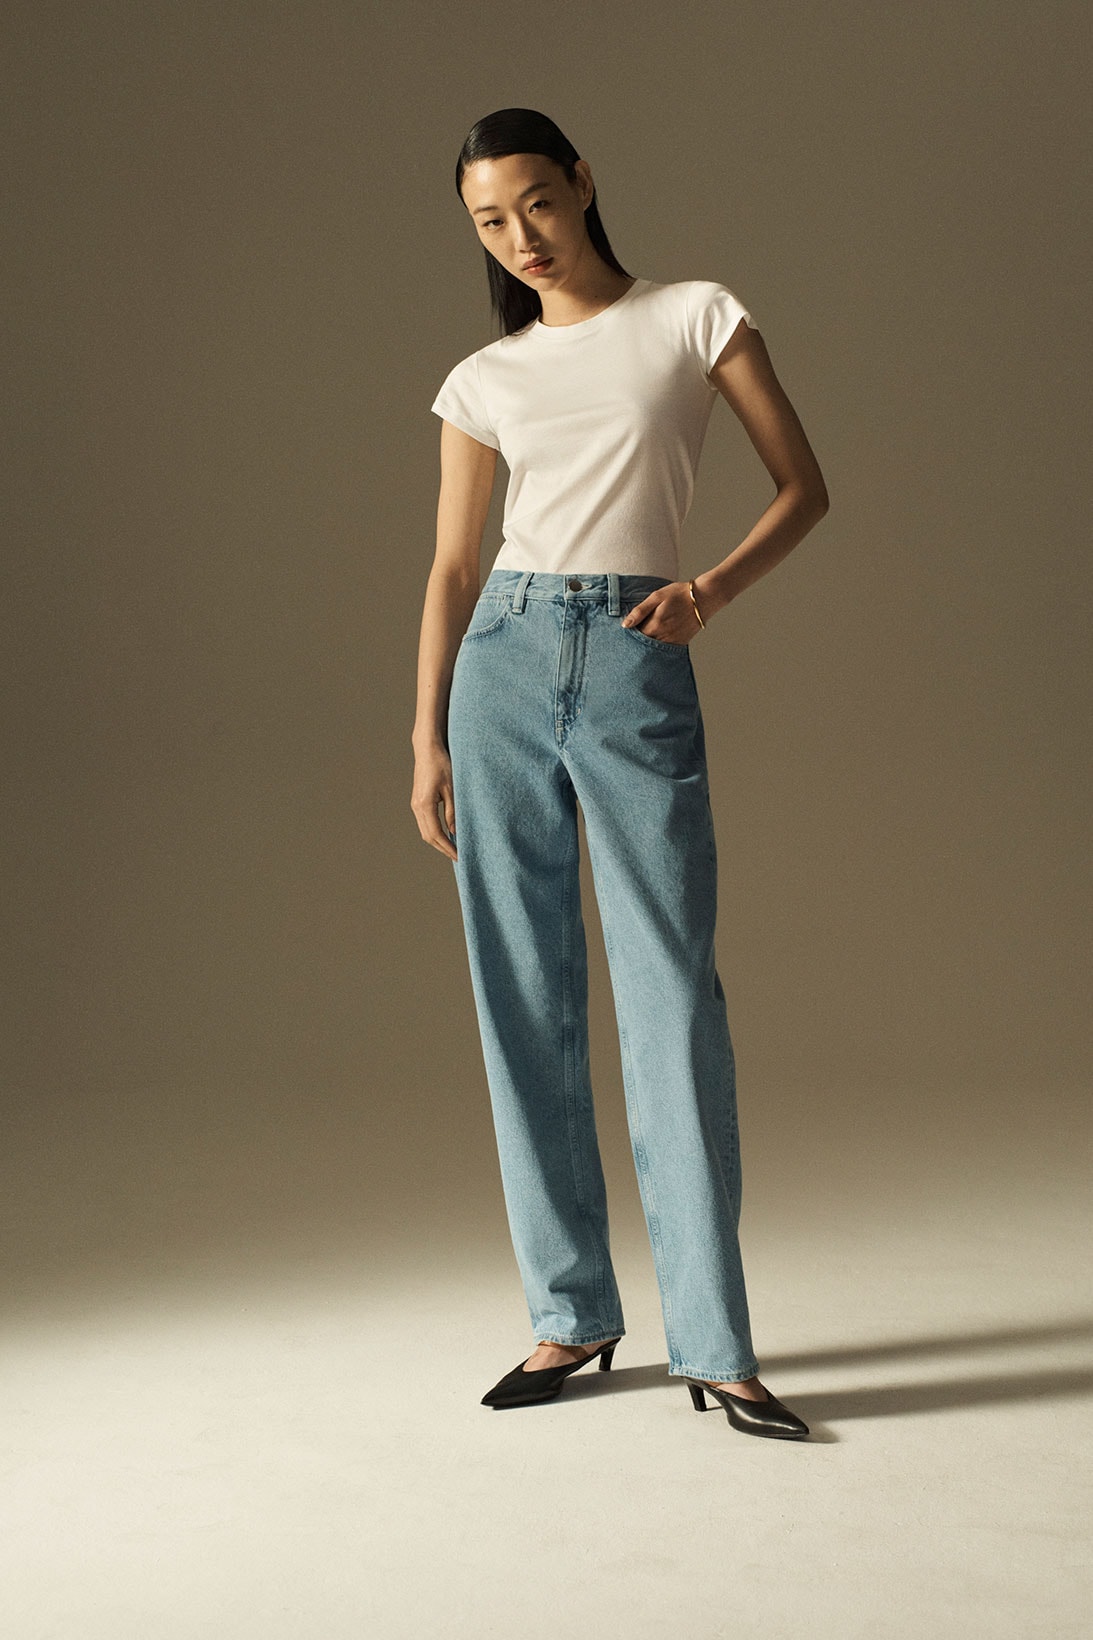 cos spring summer 2021 ss21 sustainable denim collection jeans sora choi white t-shirt